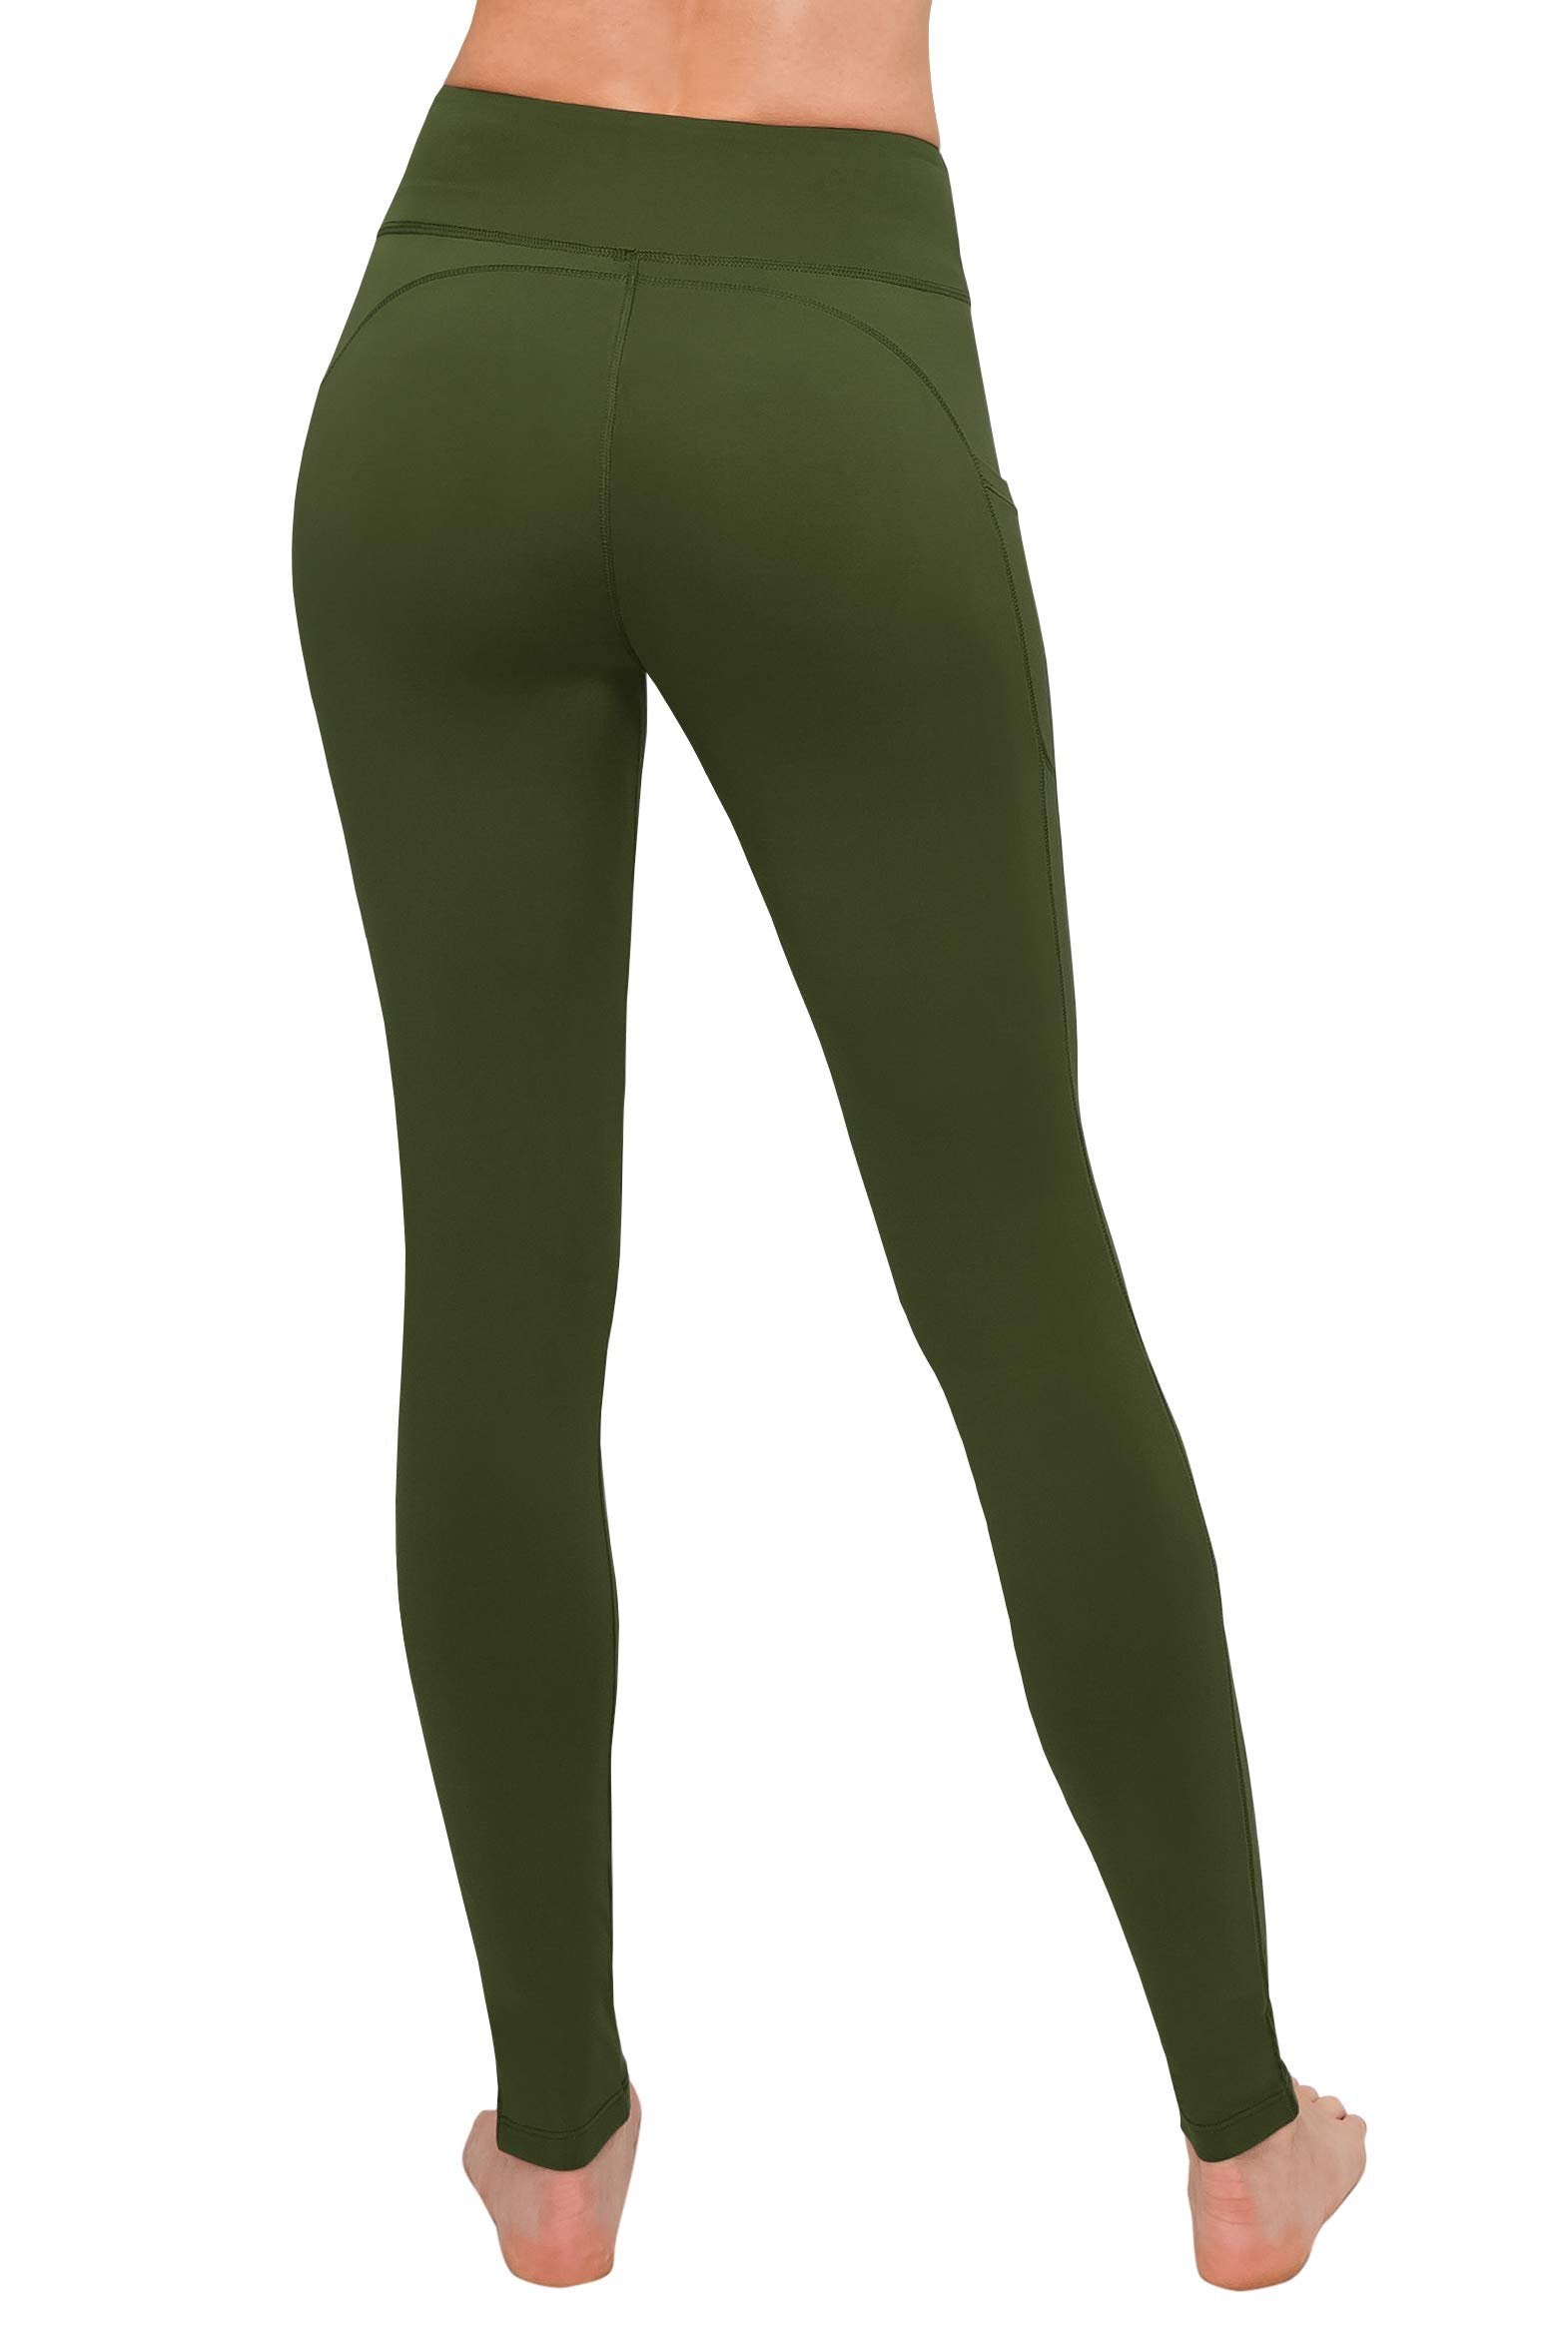 SATINA High Waisted Leggings with Pockets for Women - Leggings for Regular & Plus Size Women - Olive Leggings Women - Leggings for Women |3 Inch Waistband (Plus Size, Olive)